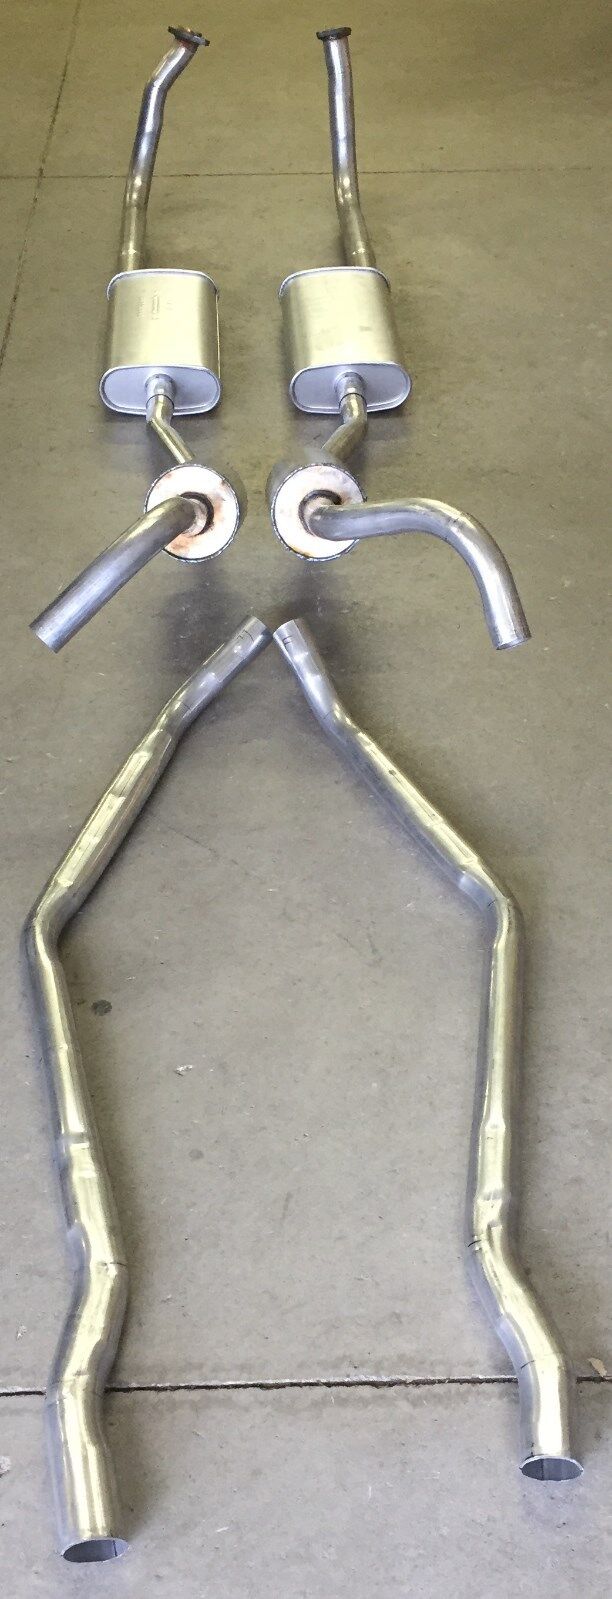 1957 FORD THUNDERBIRD DUAL EXHAUST SYSTEM, ALUMINIZED WITH RESONATORS